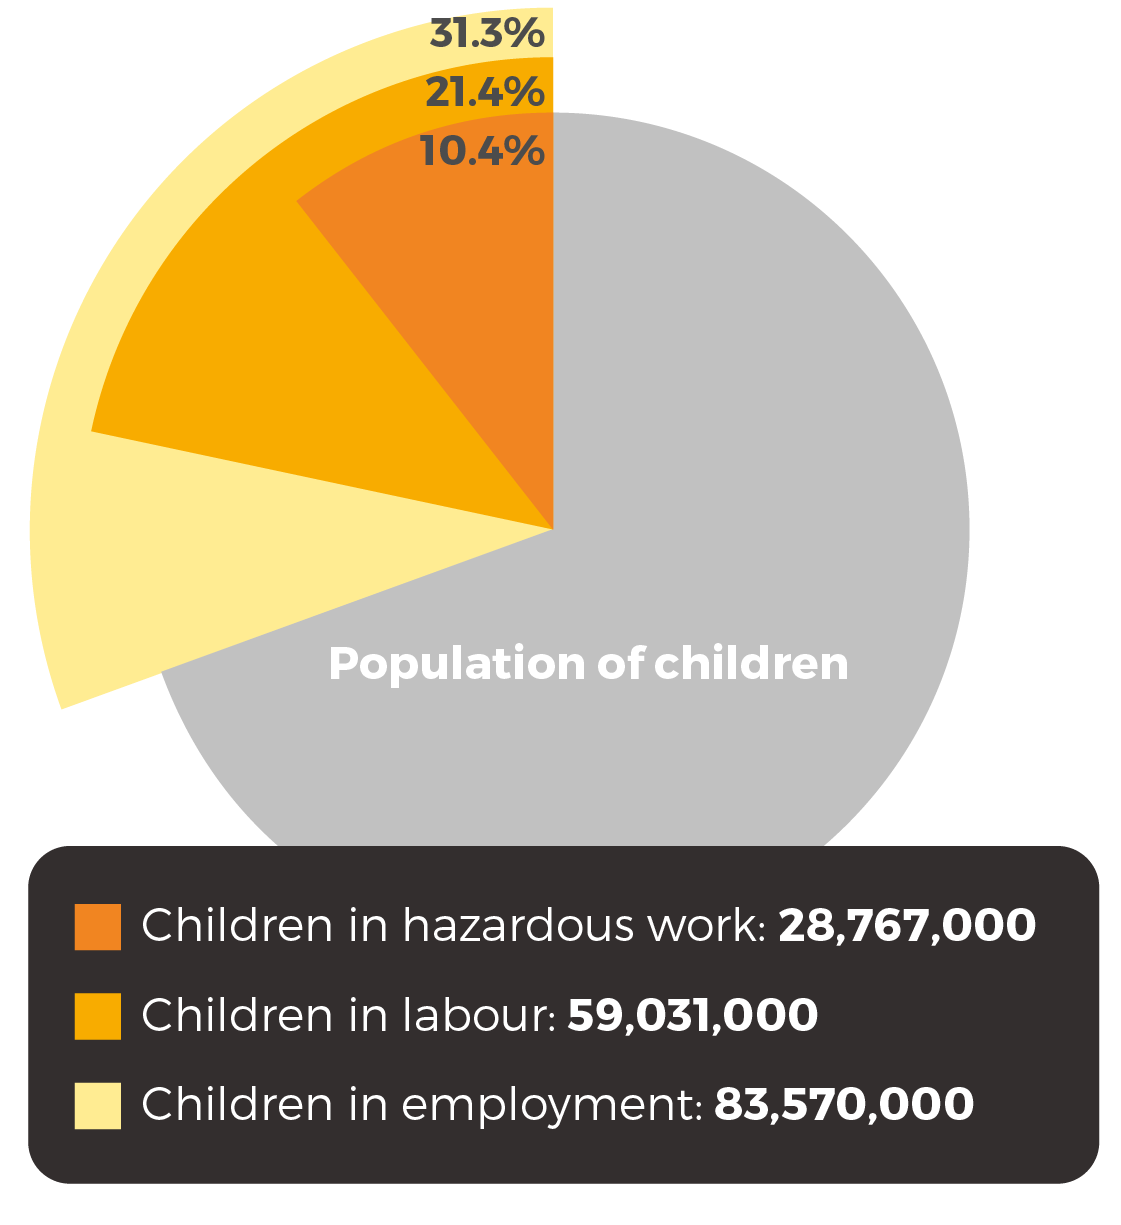 83.6m children are in employment; 59m are in child labour and 28.8m in hazardous work 